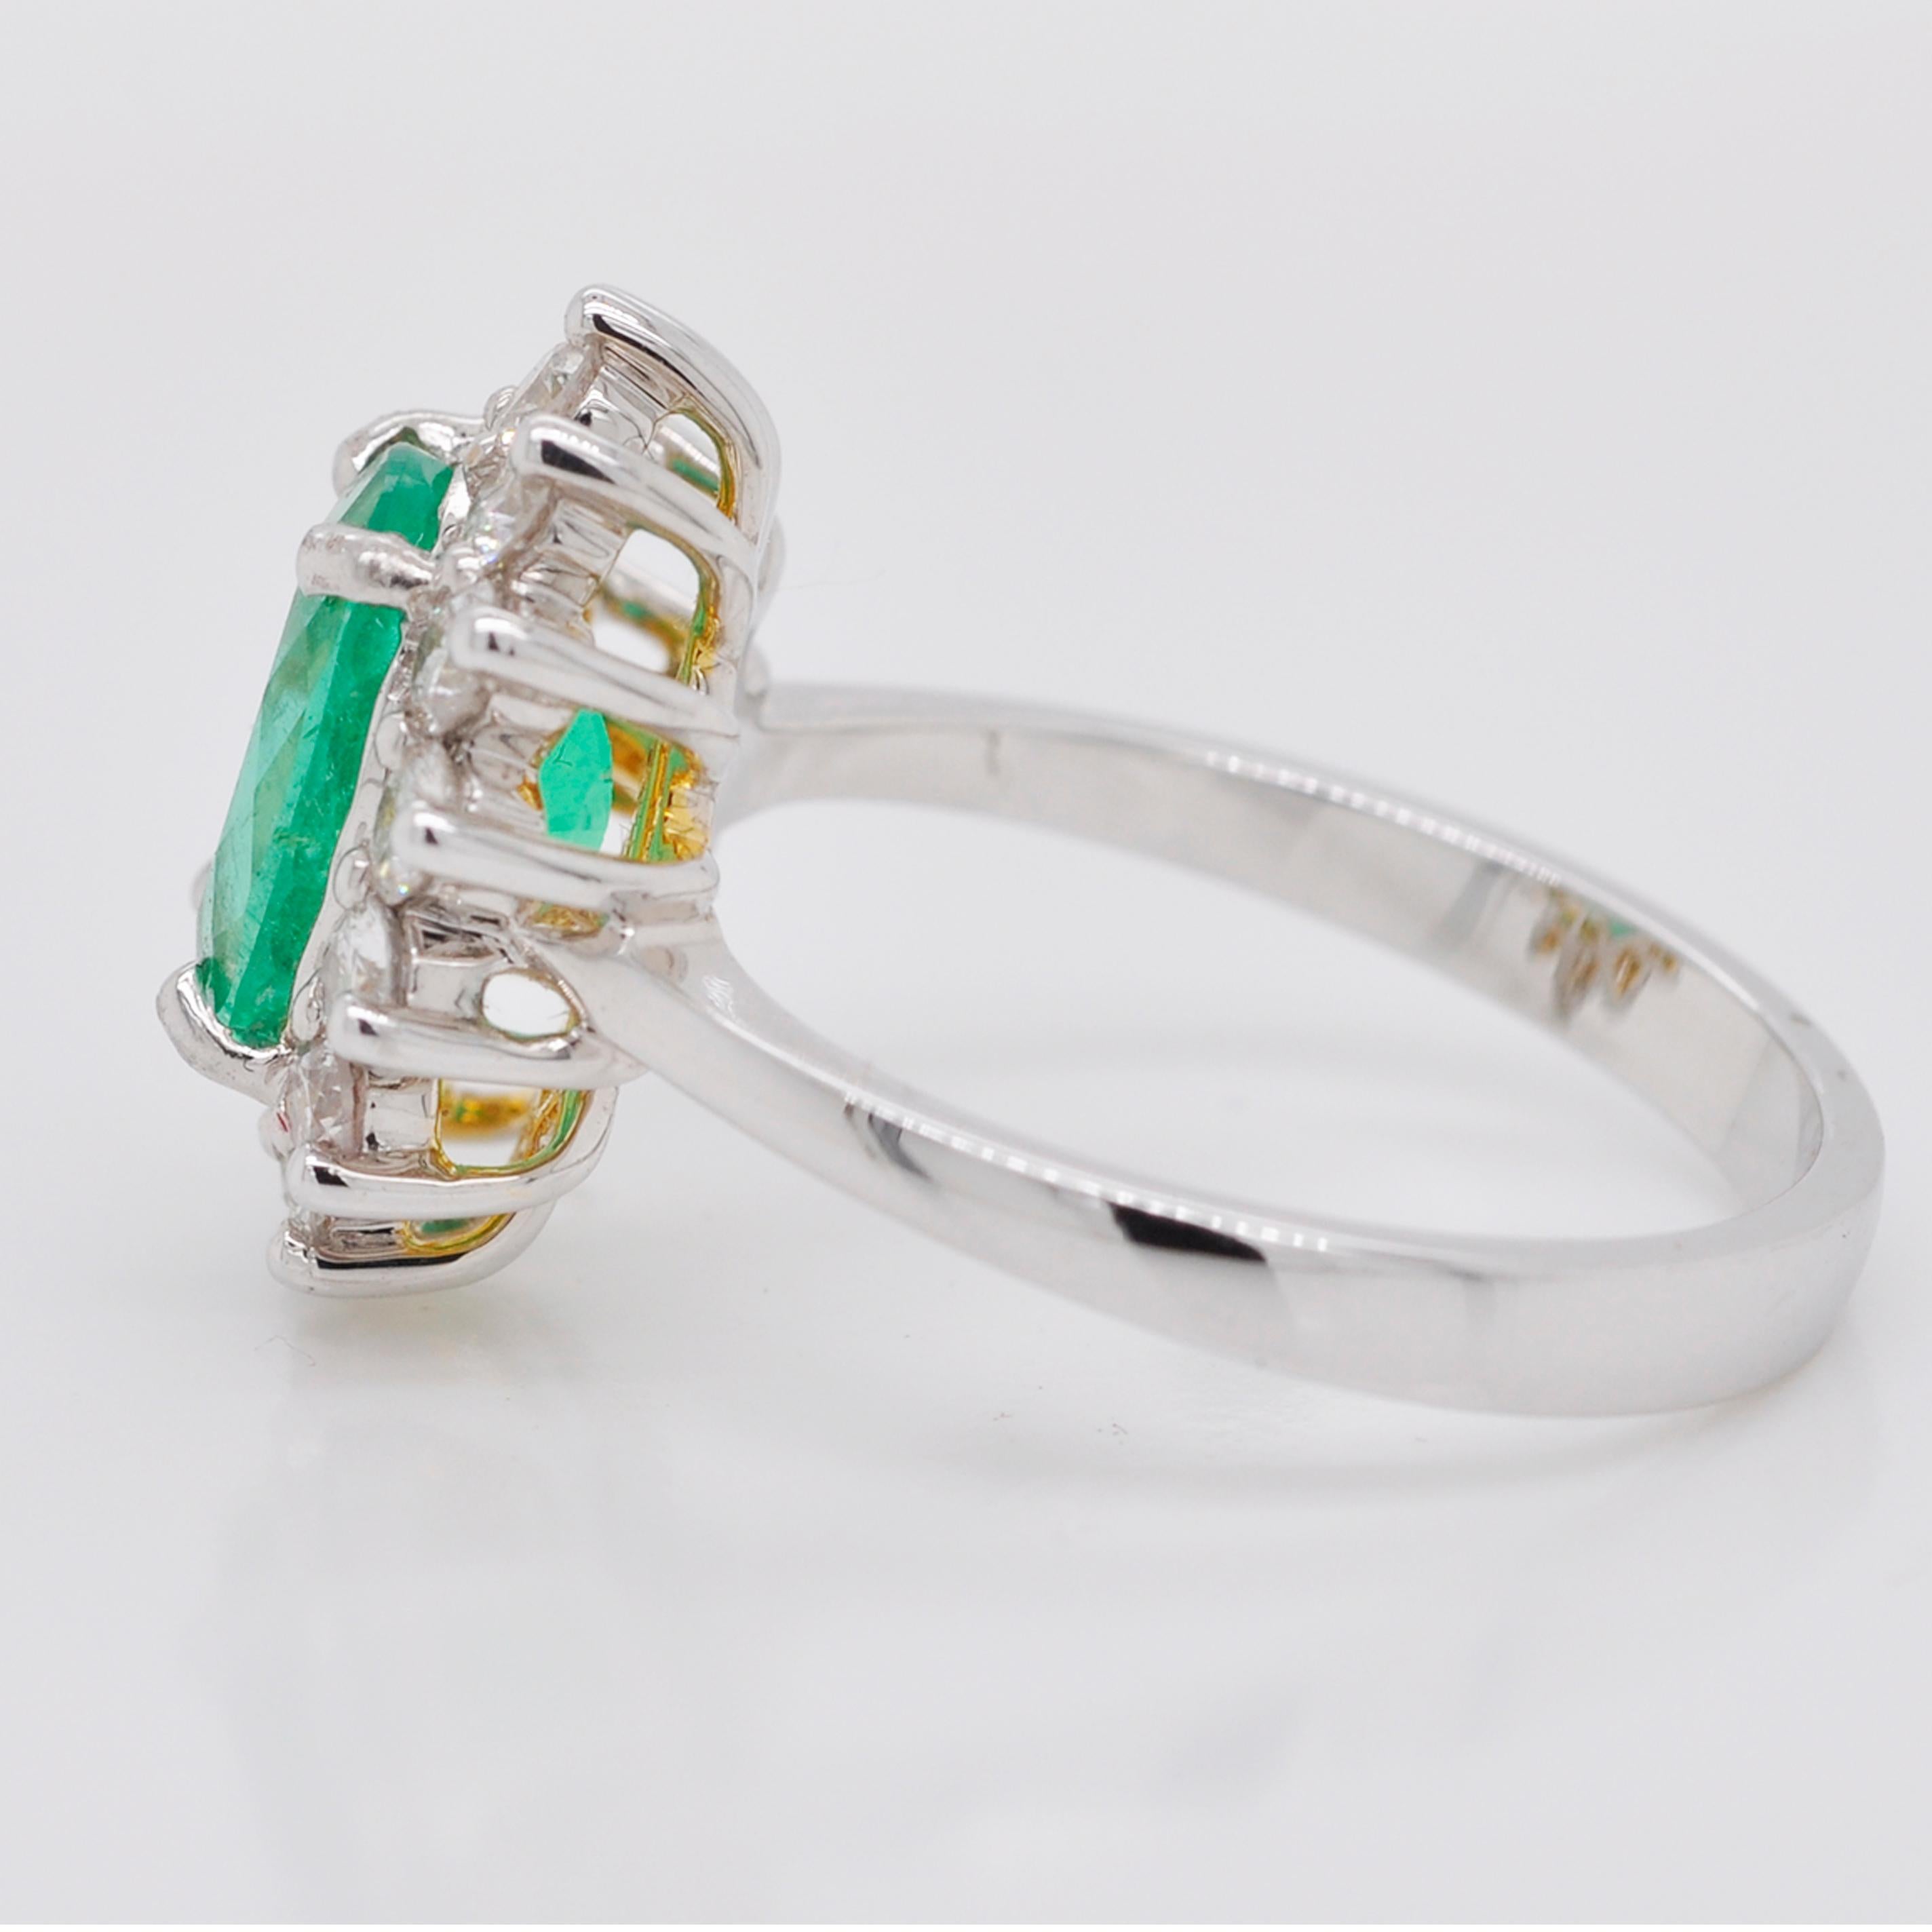 18 Karat White Gold Certified Oval Colombian Emerald Diamond Engagement Ring 4